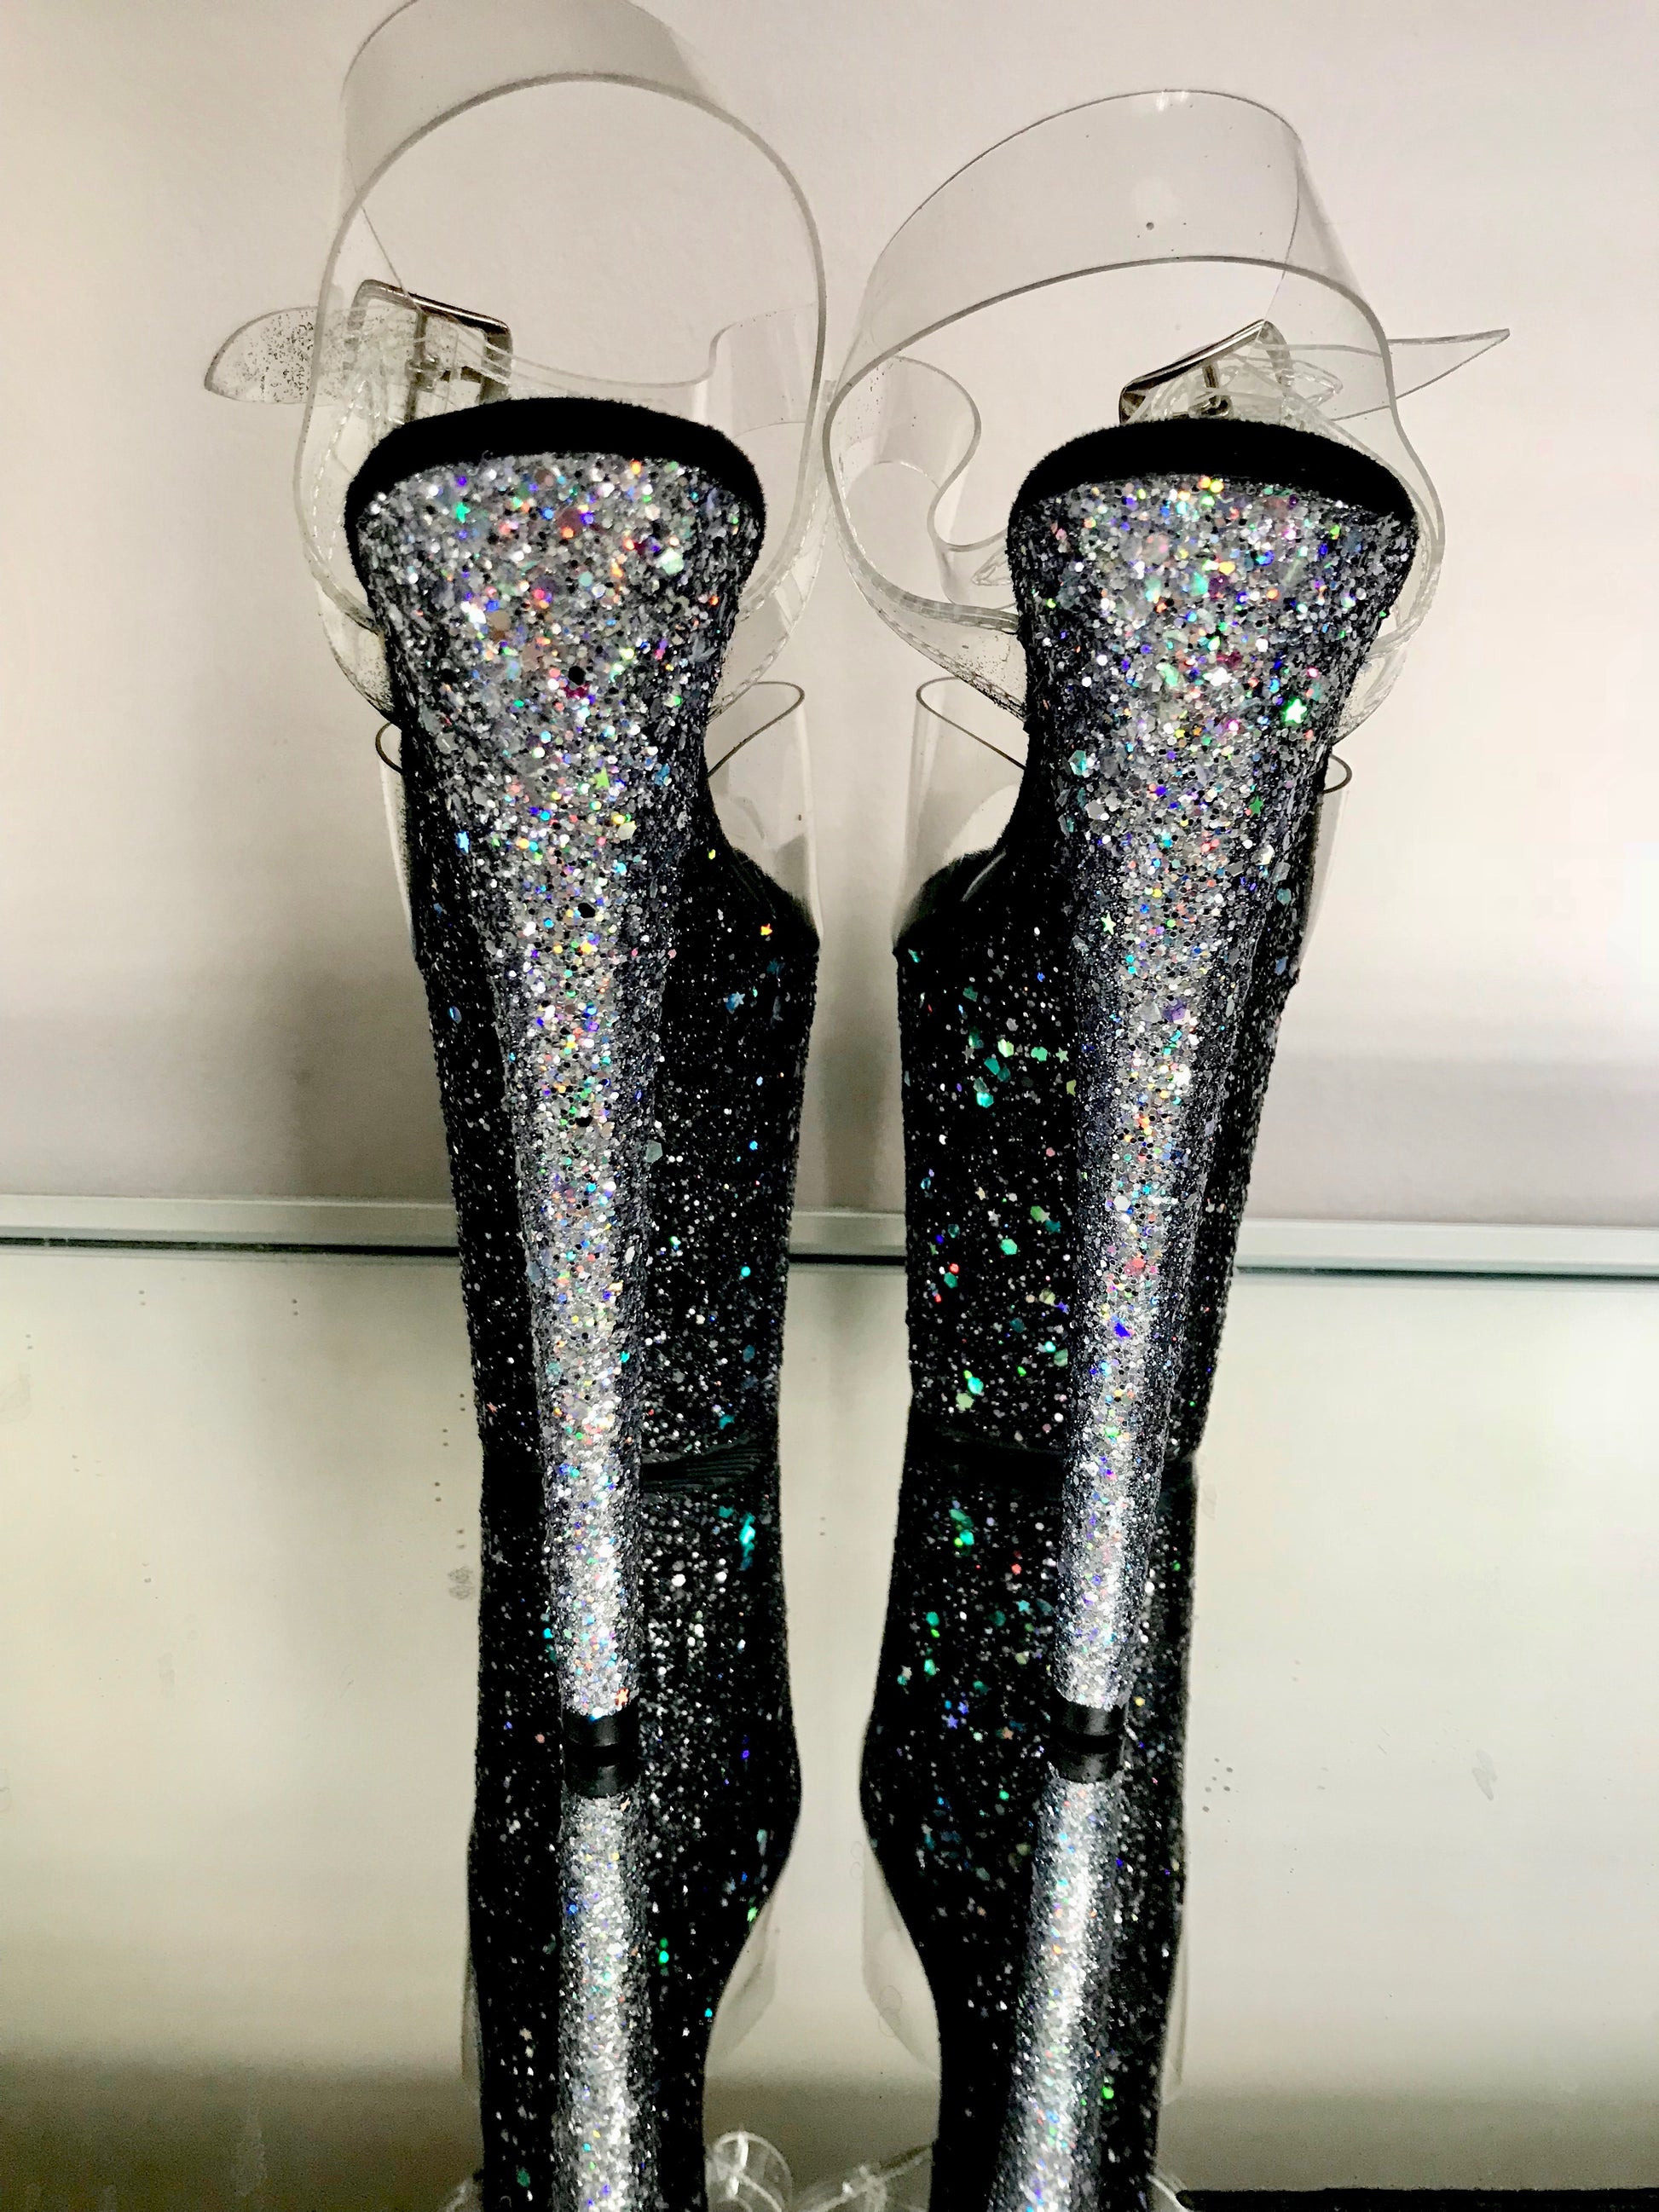 Platform heels with clear straps, and dual Ombre with silver and black glitter. Shades of silver glitter starting at the front of the platform, and back of the heels, blending to black glitter under the arch, and down the inside of the heels. Black soles.